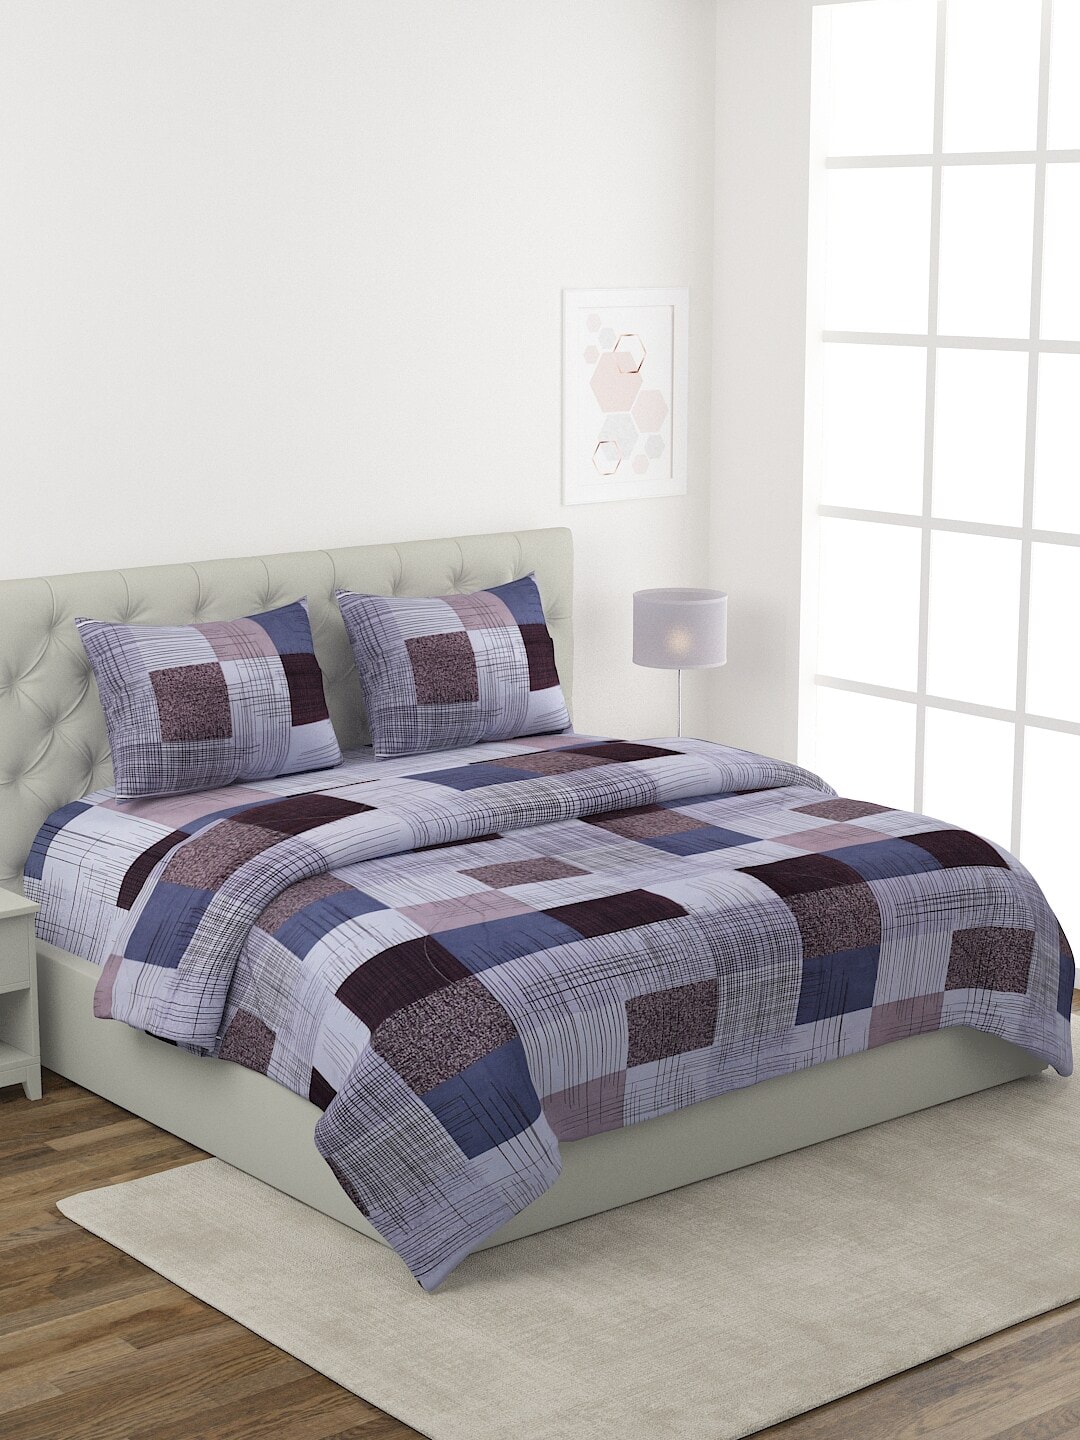 ROMEE Purple & Brown Printed Pure Cotton Double King  Bedding Set Price in India